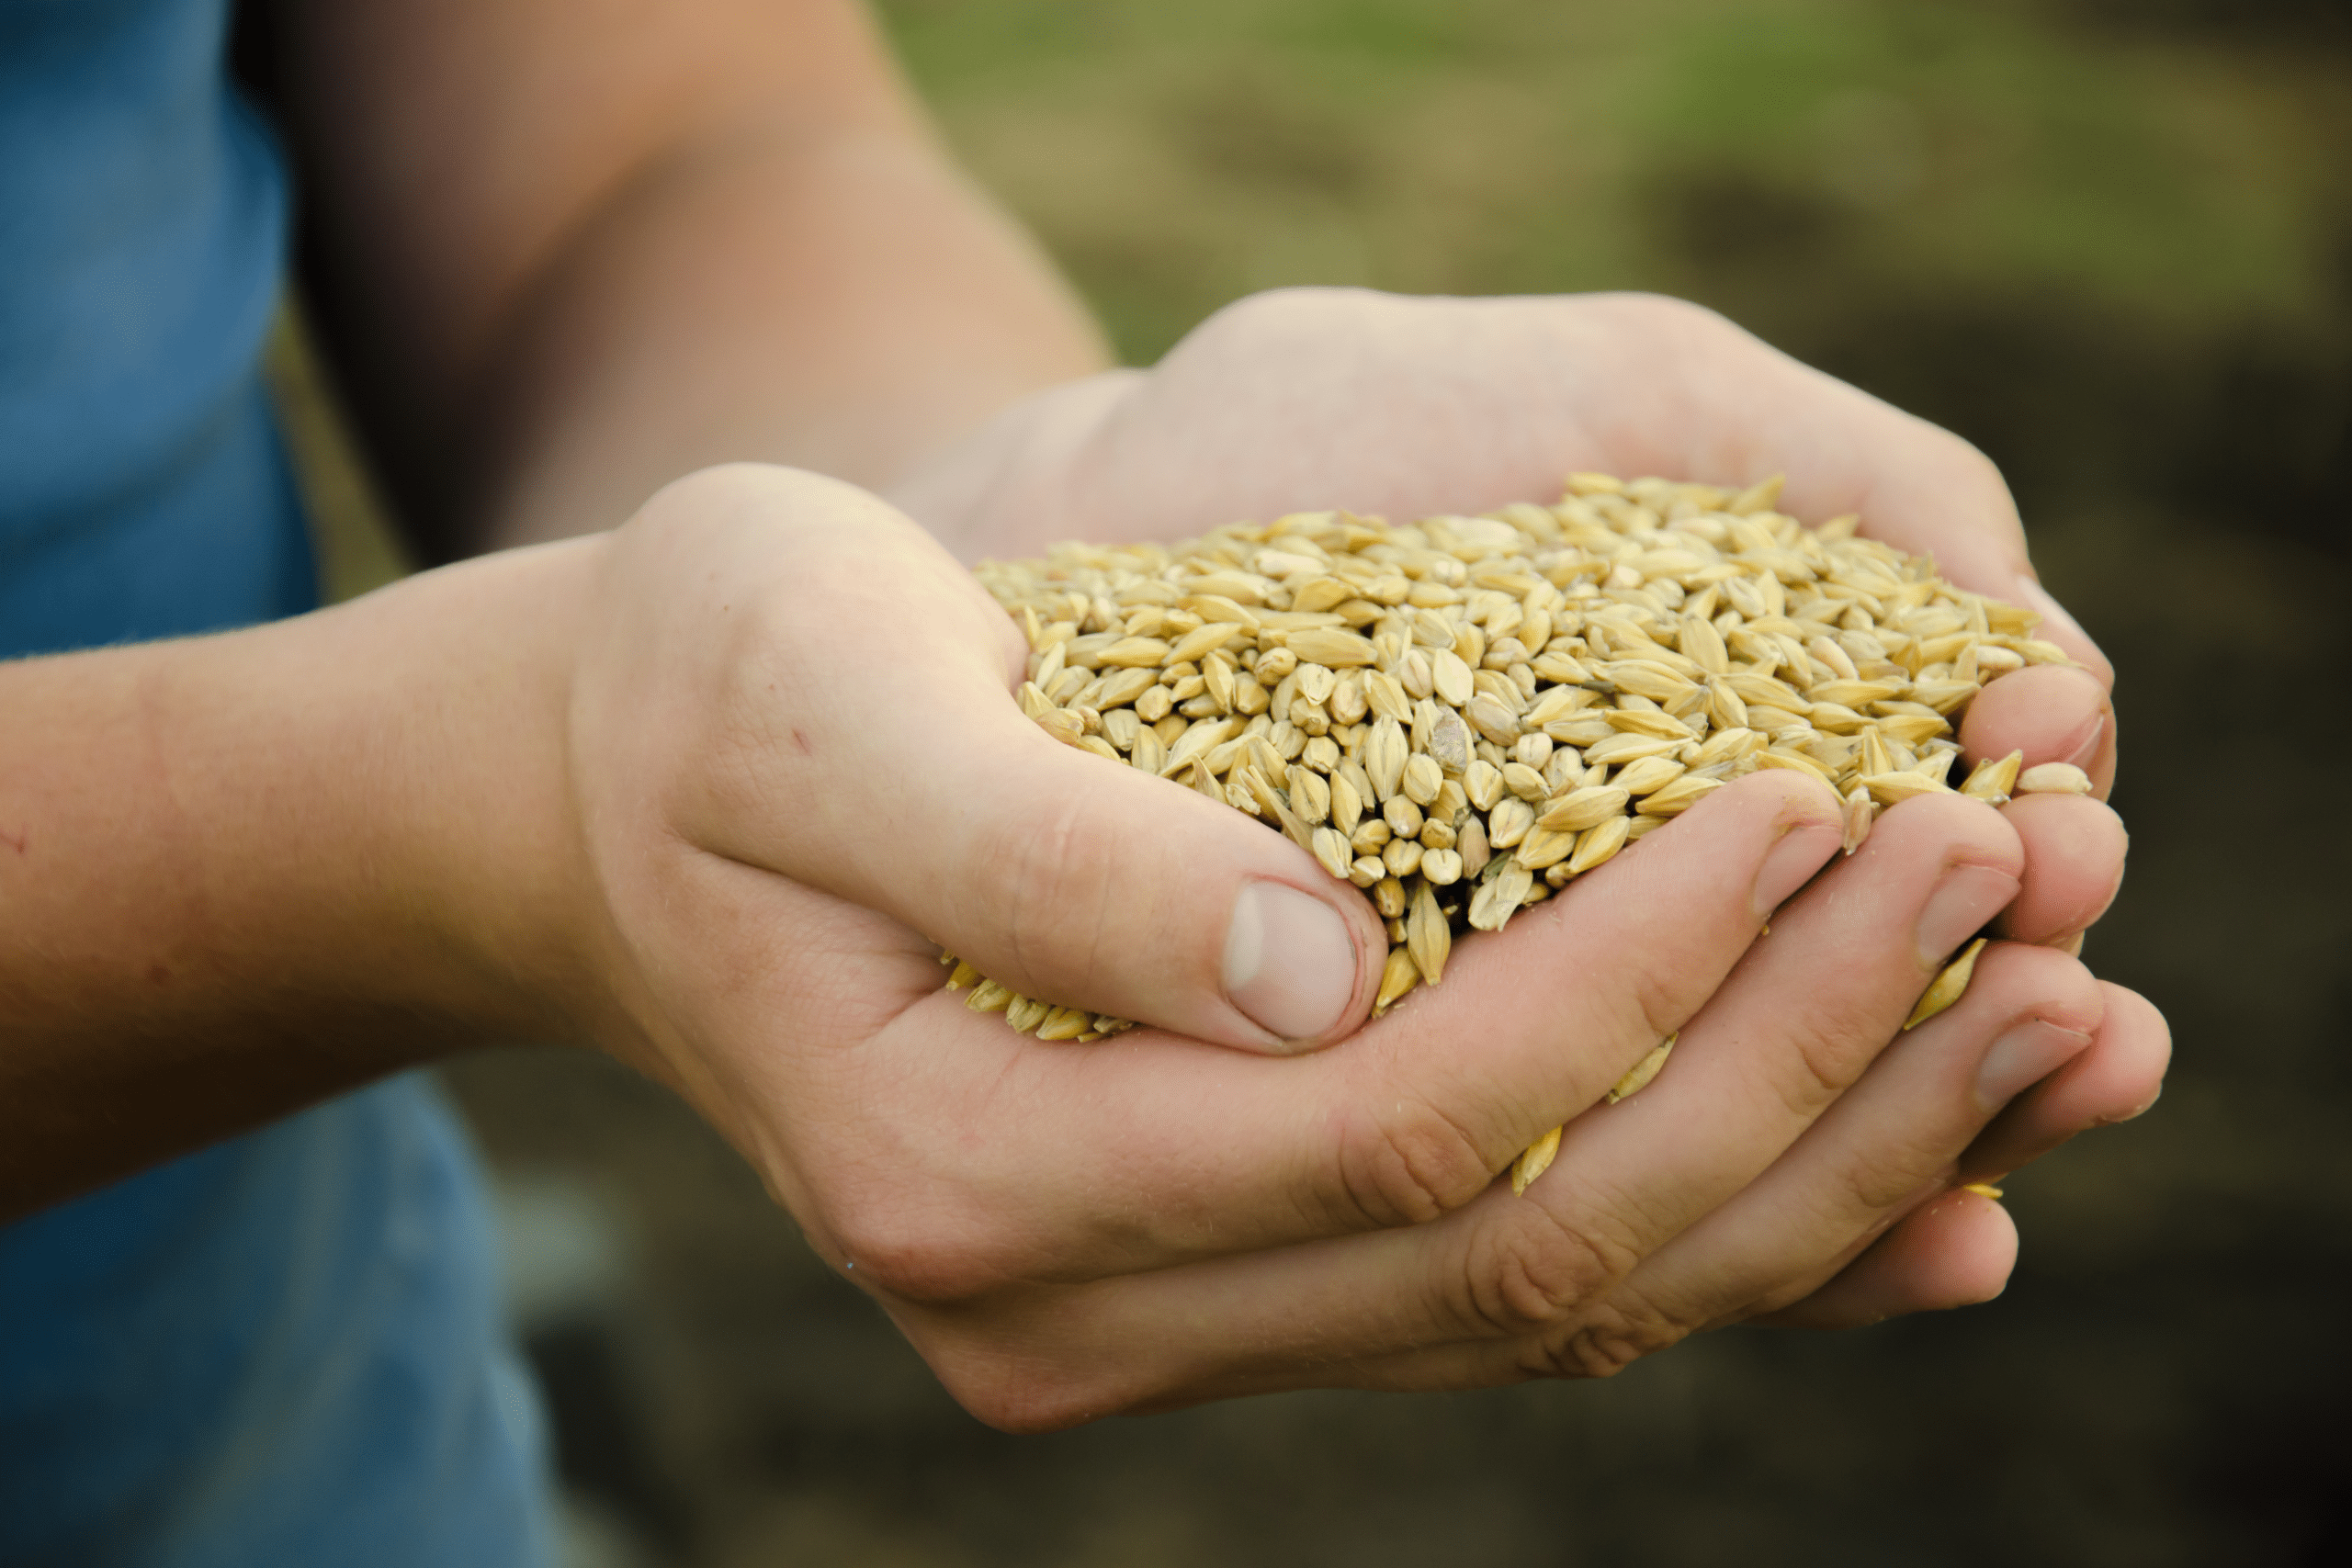 a child's hands brimming with kernels of wheat